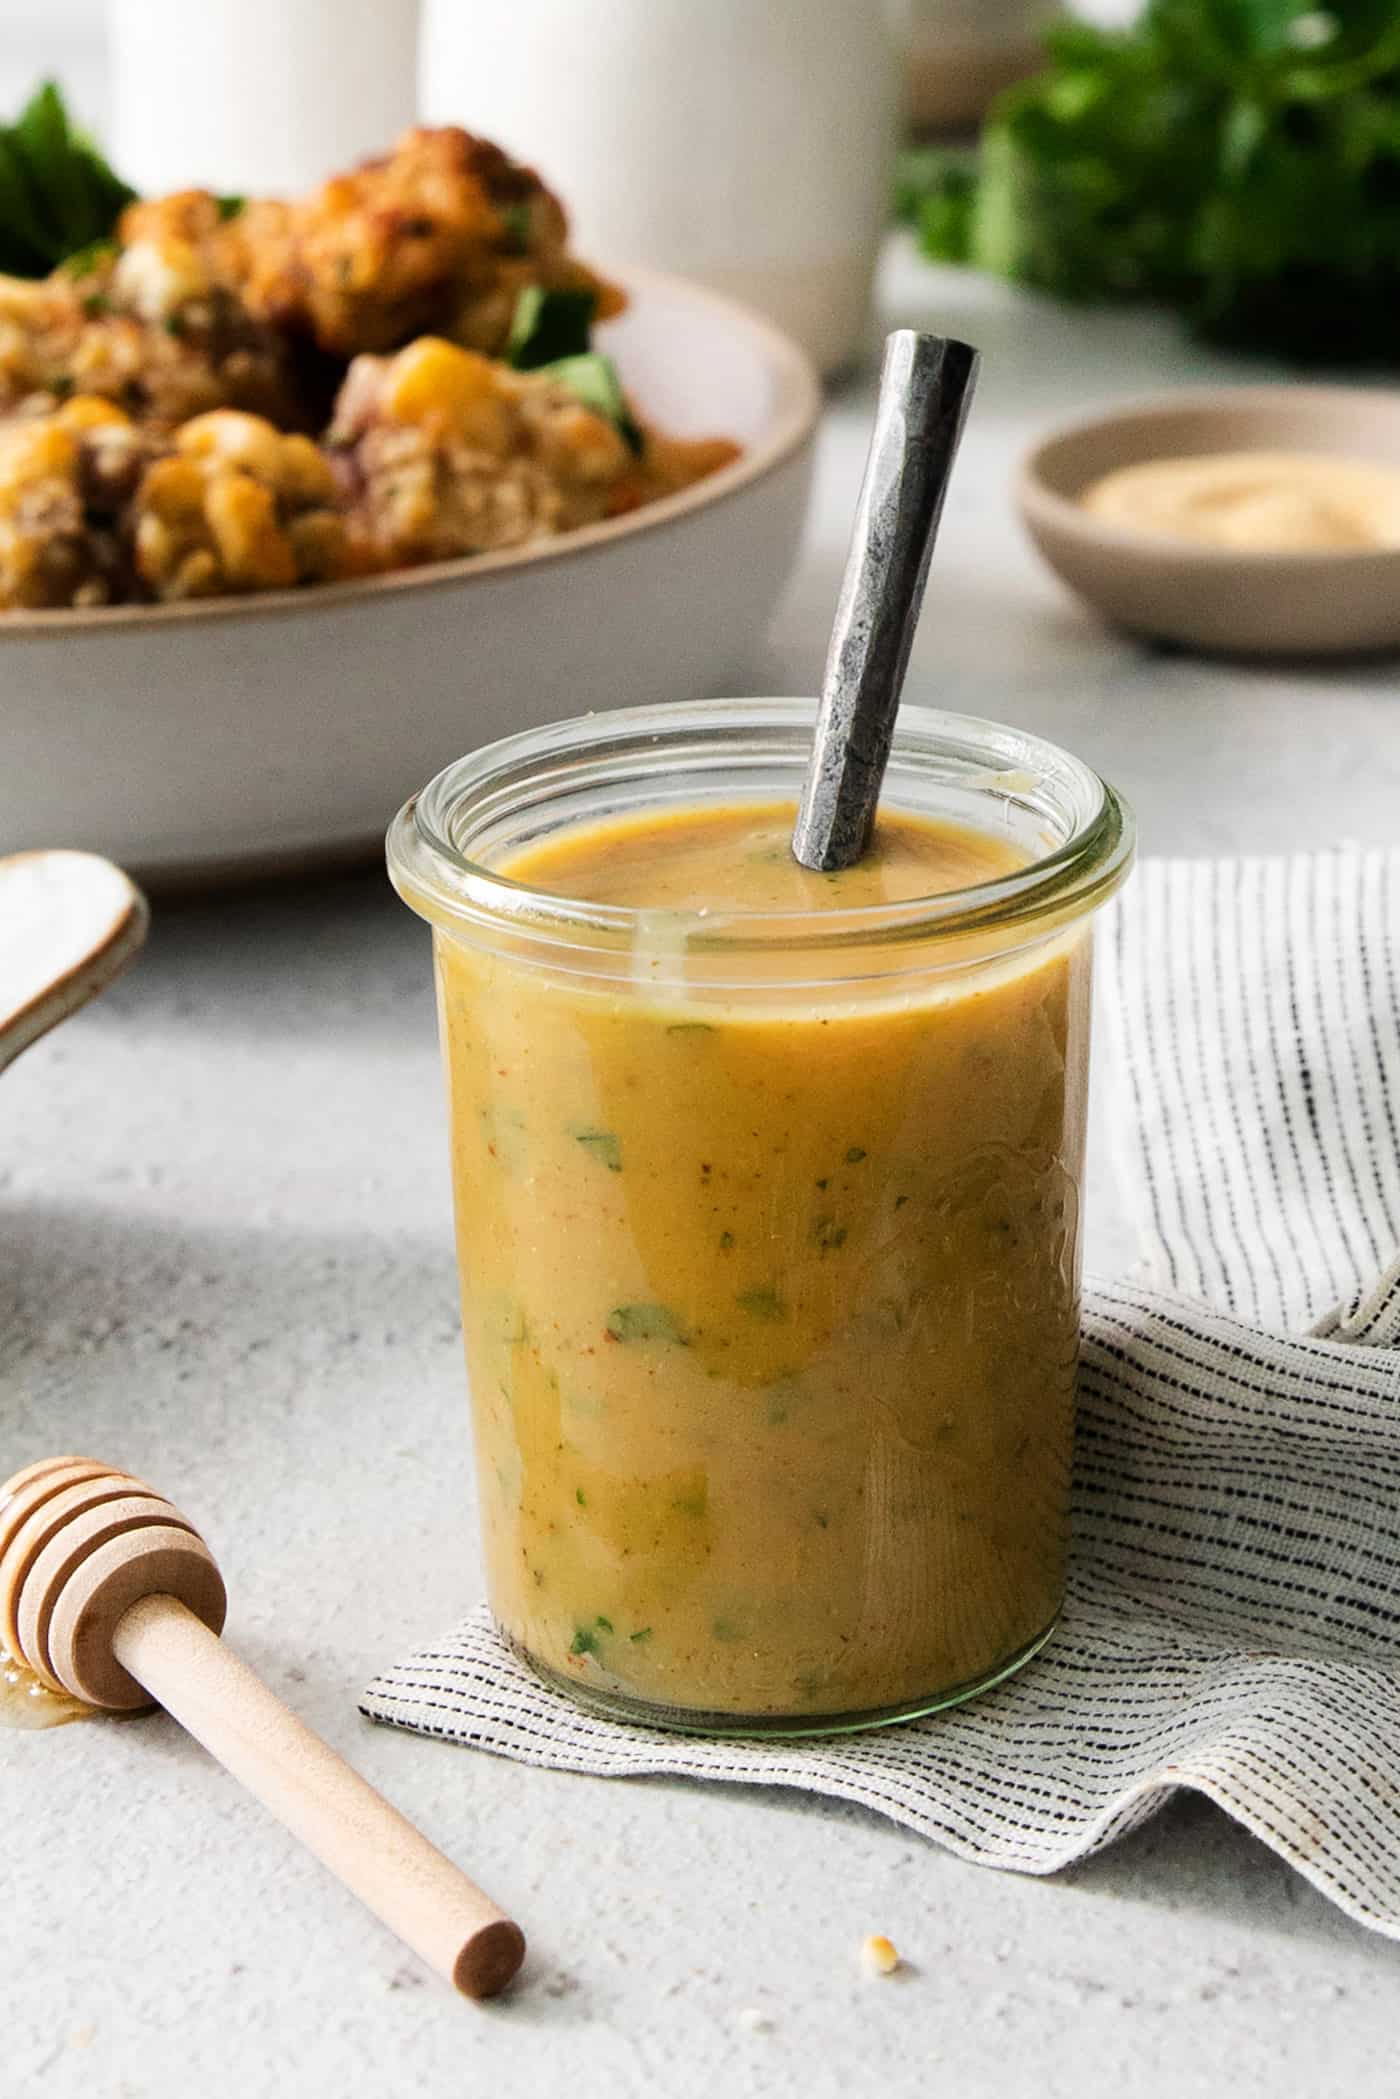 A glass jar holds honey mustard dip with a spoon handle sticking out.